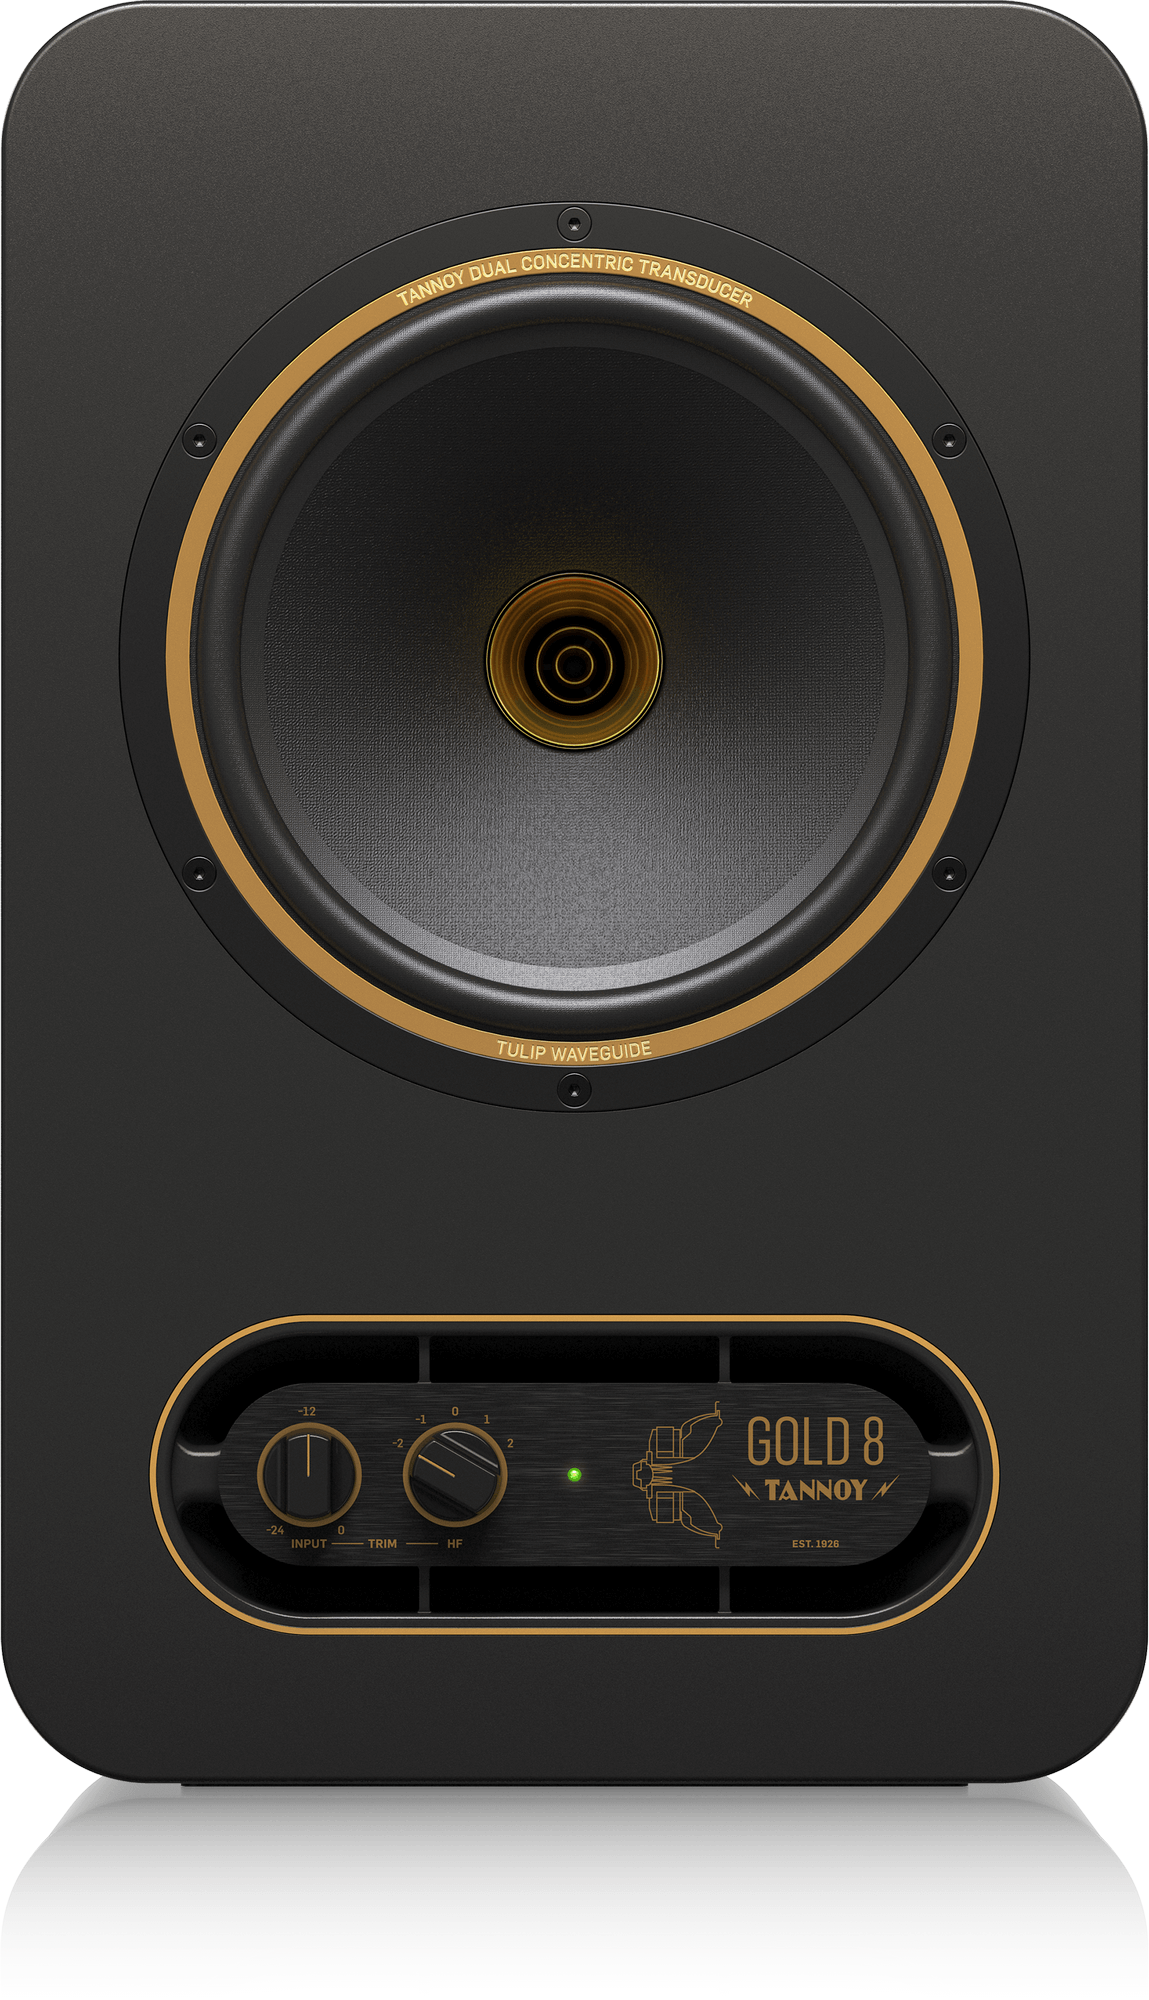 Tannoy | Product | GOLD 8